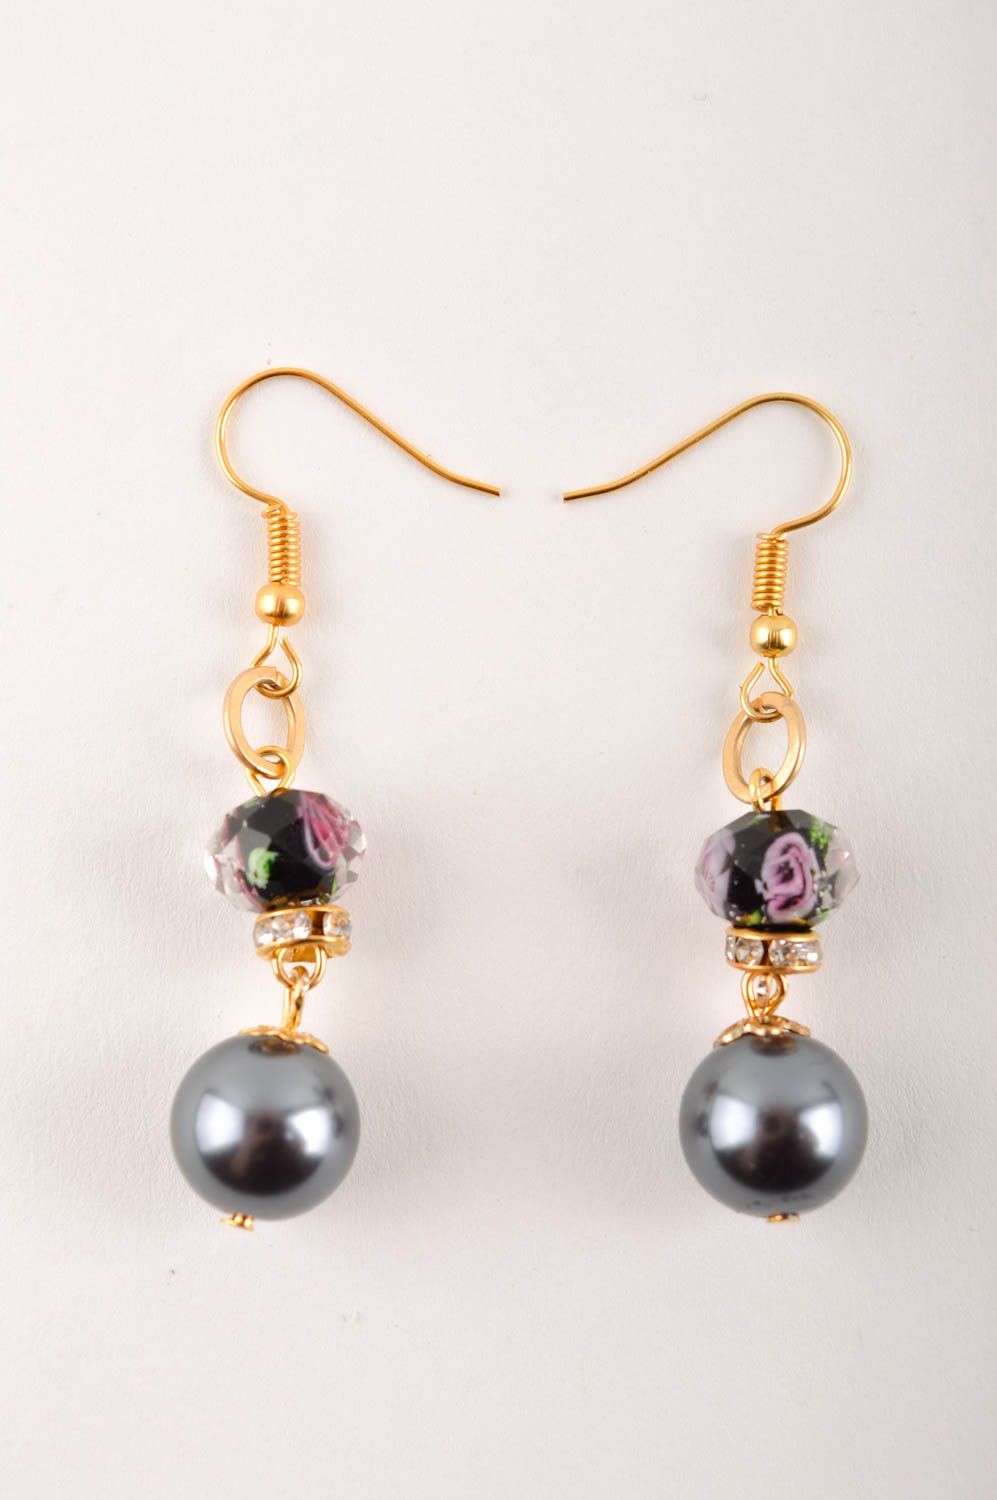 Handmade earrings with artificial pearls designer accessories fashion jewelry photo 3